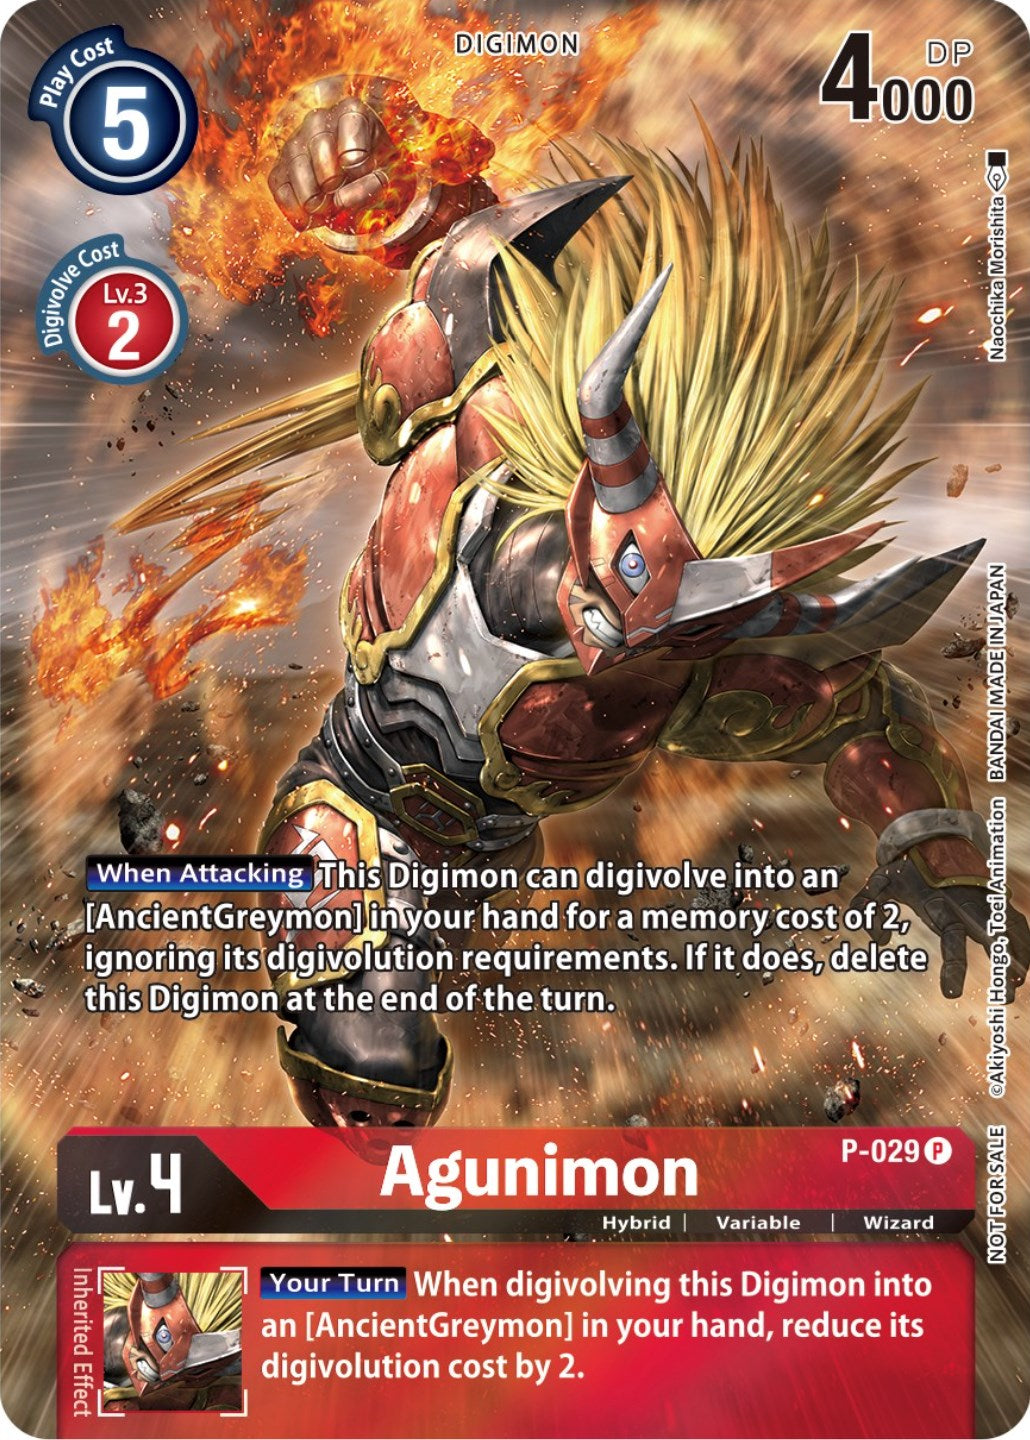 Agunimon [P-029] (2nd Anniversary Frontier Card) [Promotional Cards] | Event Horizon Hobbies CA